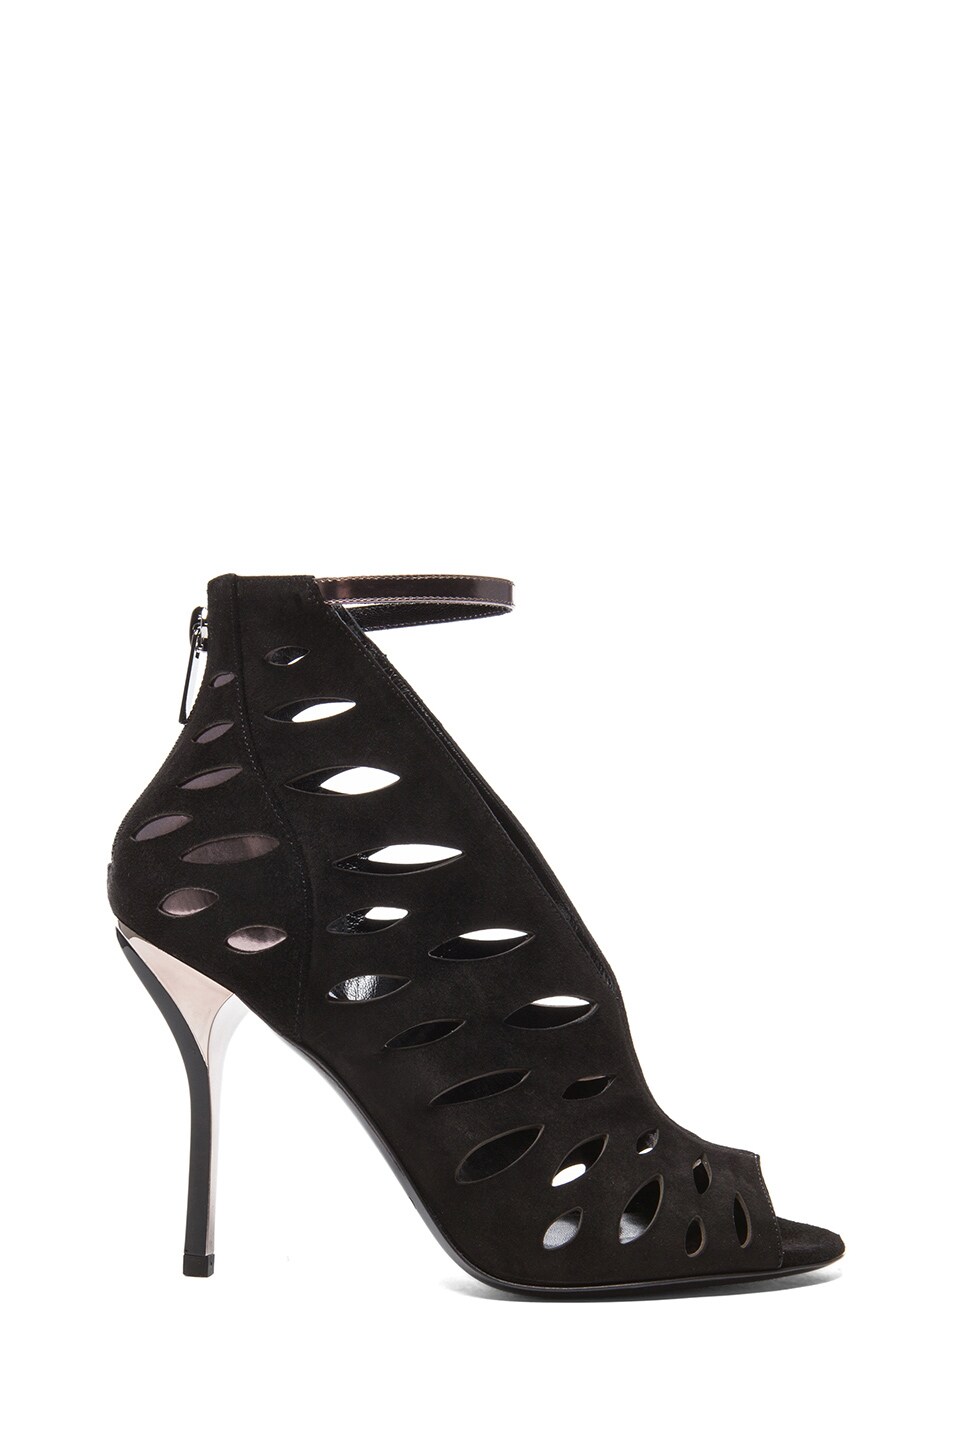 Image 1 of Jimmy Choo Tamera Suede Heeled Sandals in Black & Anthracite